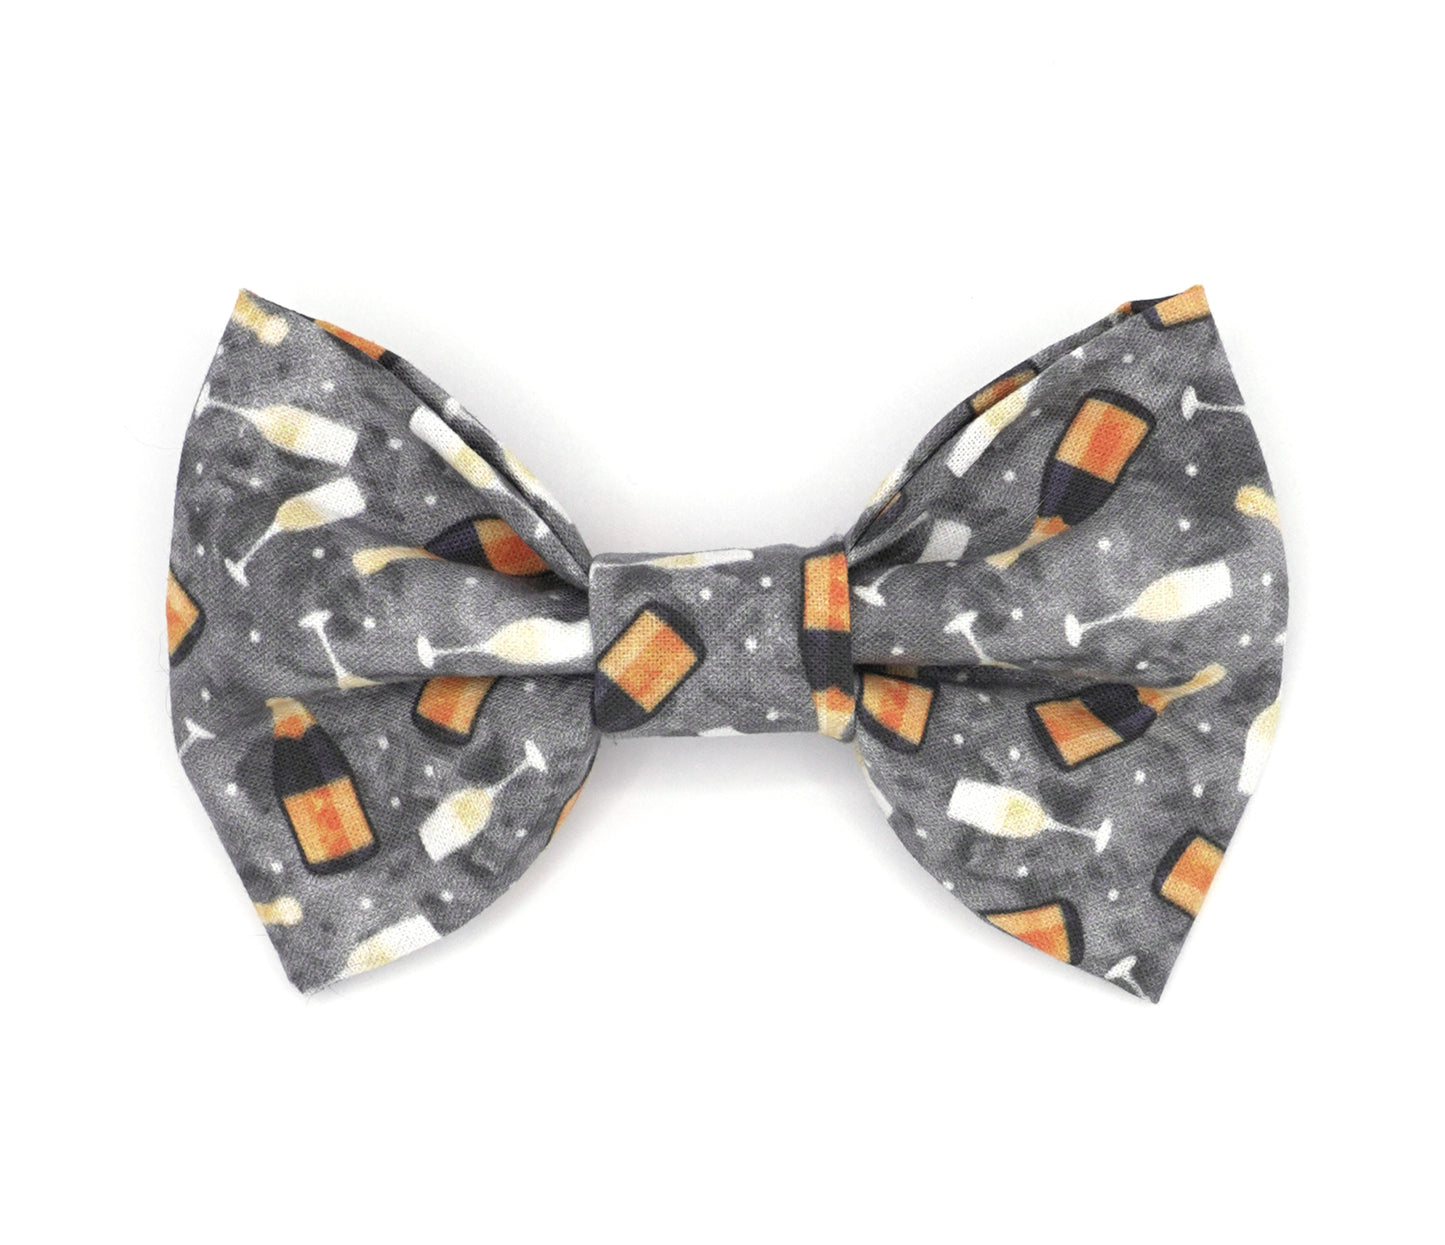 Handmade cotton bow tie for dogs (or other pets). Elastic straps on back with snaps make it easy to add to collar, harness, or leash. Grey background with sparkling wine bottles and glasses.